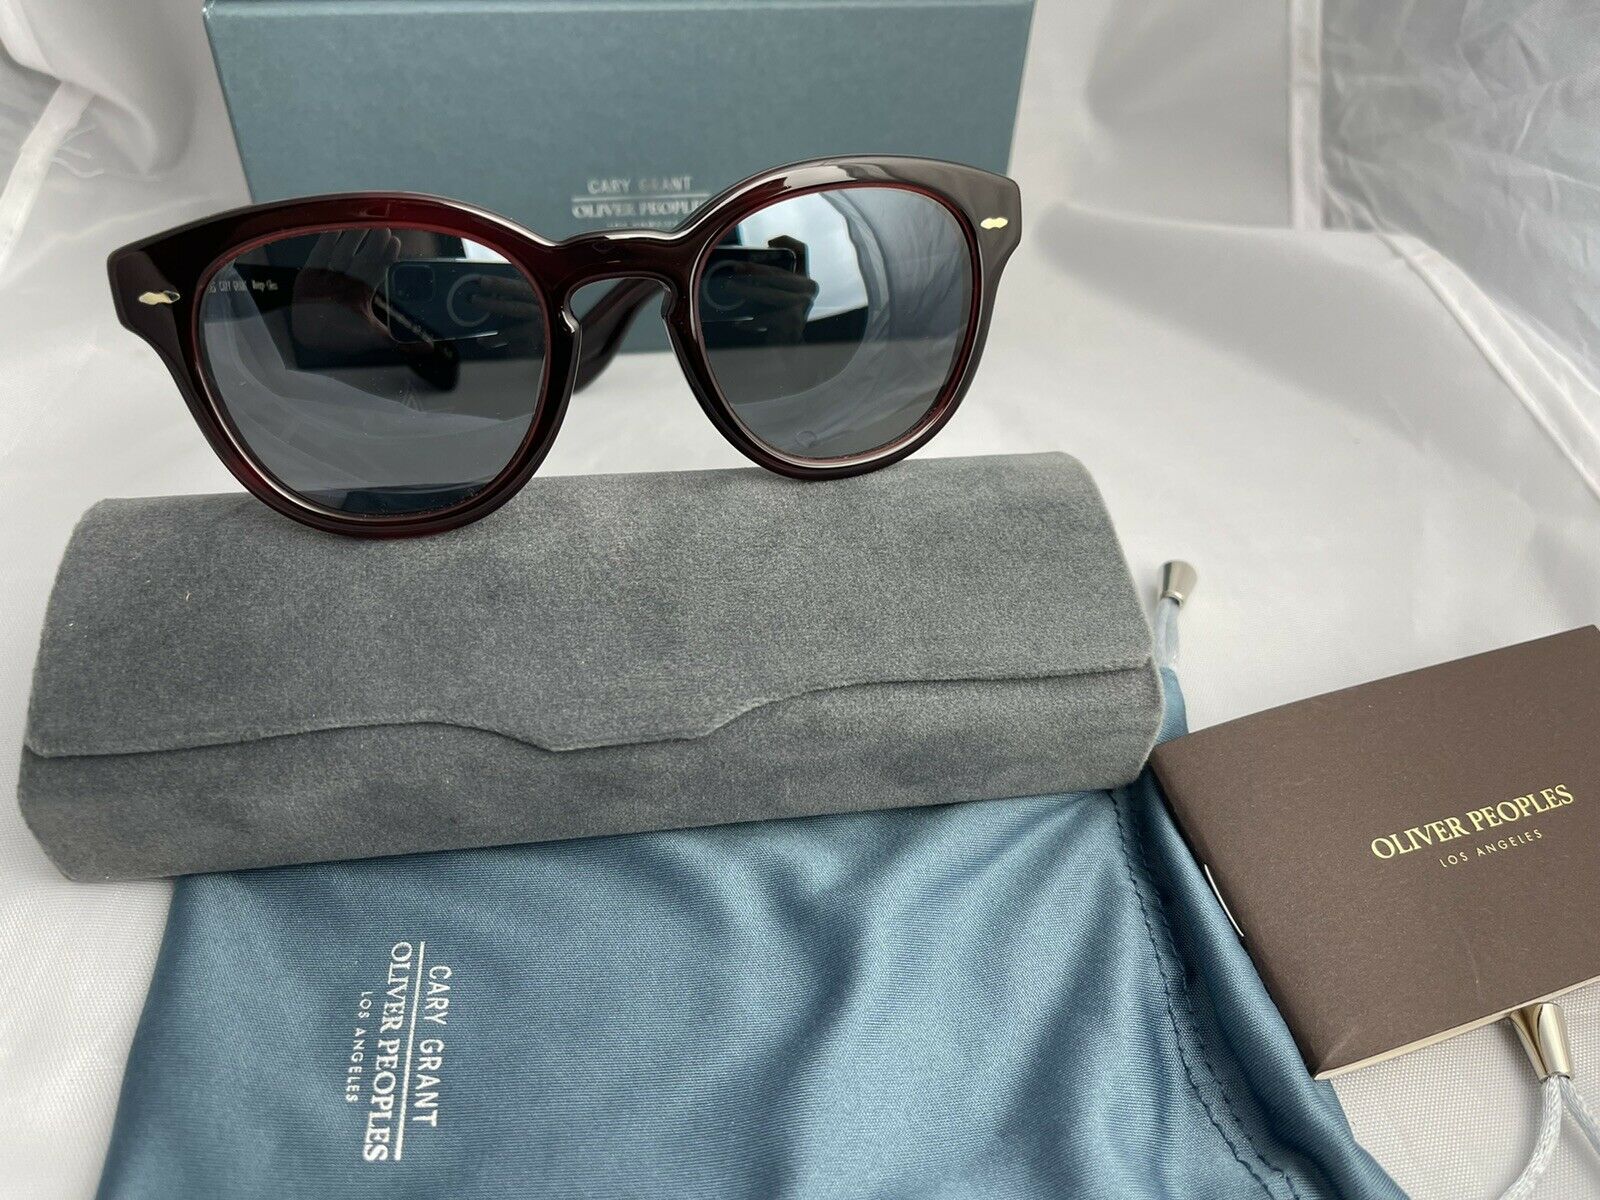 Oliver Peoples Cary Grant OV5413SU Bordeaux Bark / Carbon Gray size 50 –  Shade Review Store